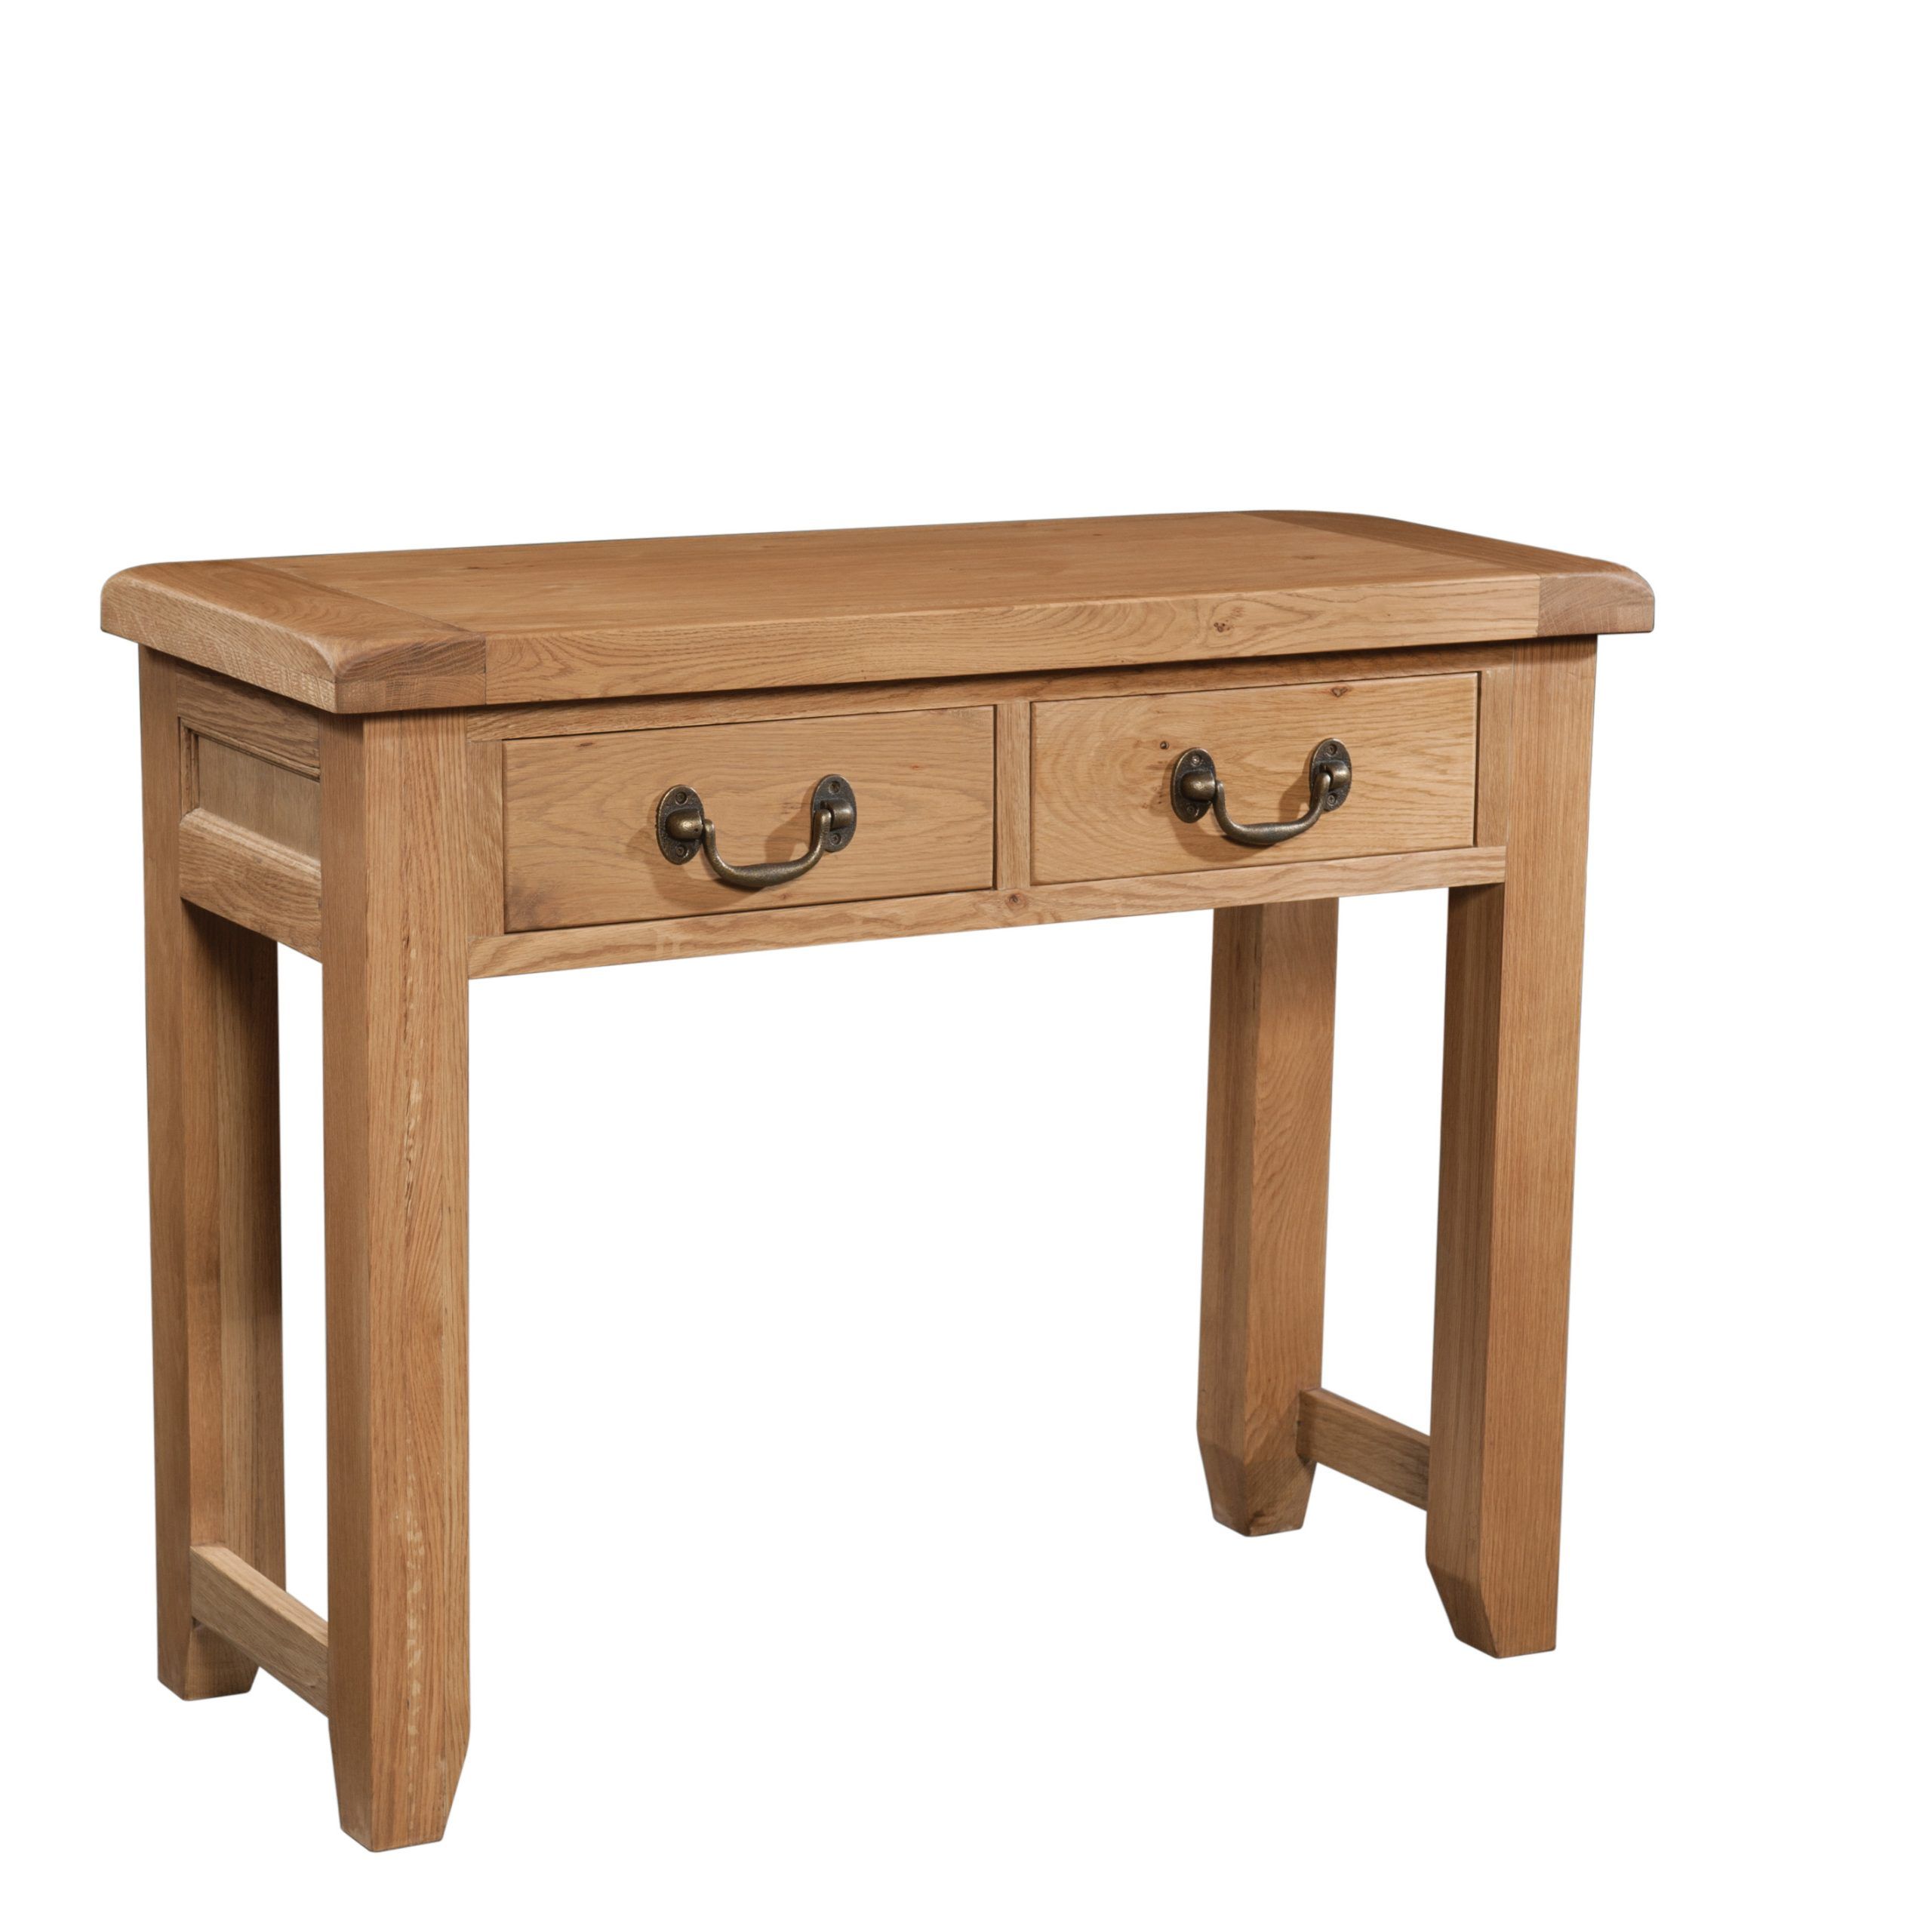 Wiltshire Rustic Oak 2 Drawer Console Table Within Rustic Oak And Black Console Tables (View 4 of 20)